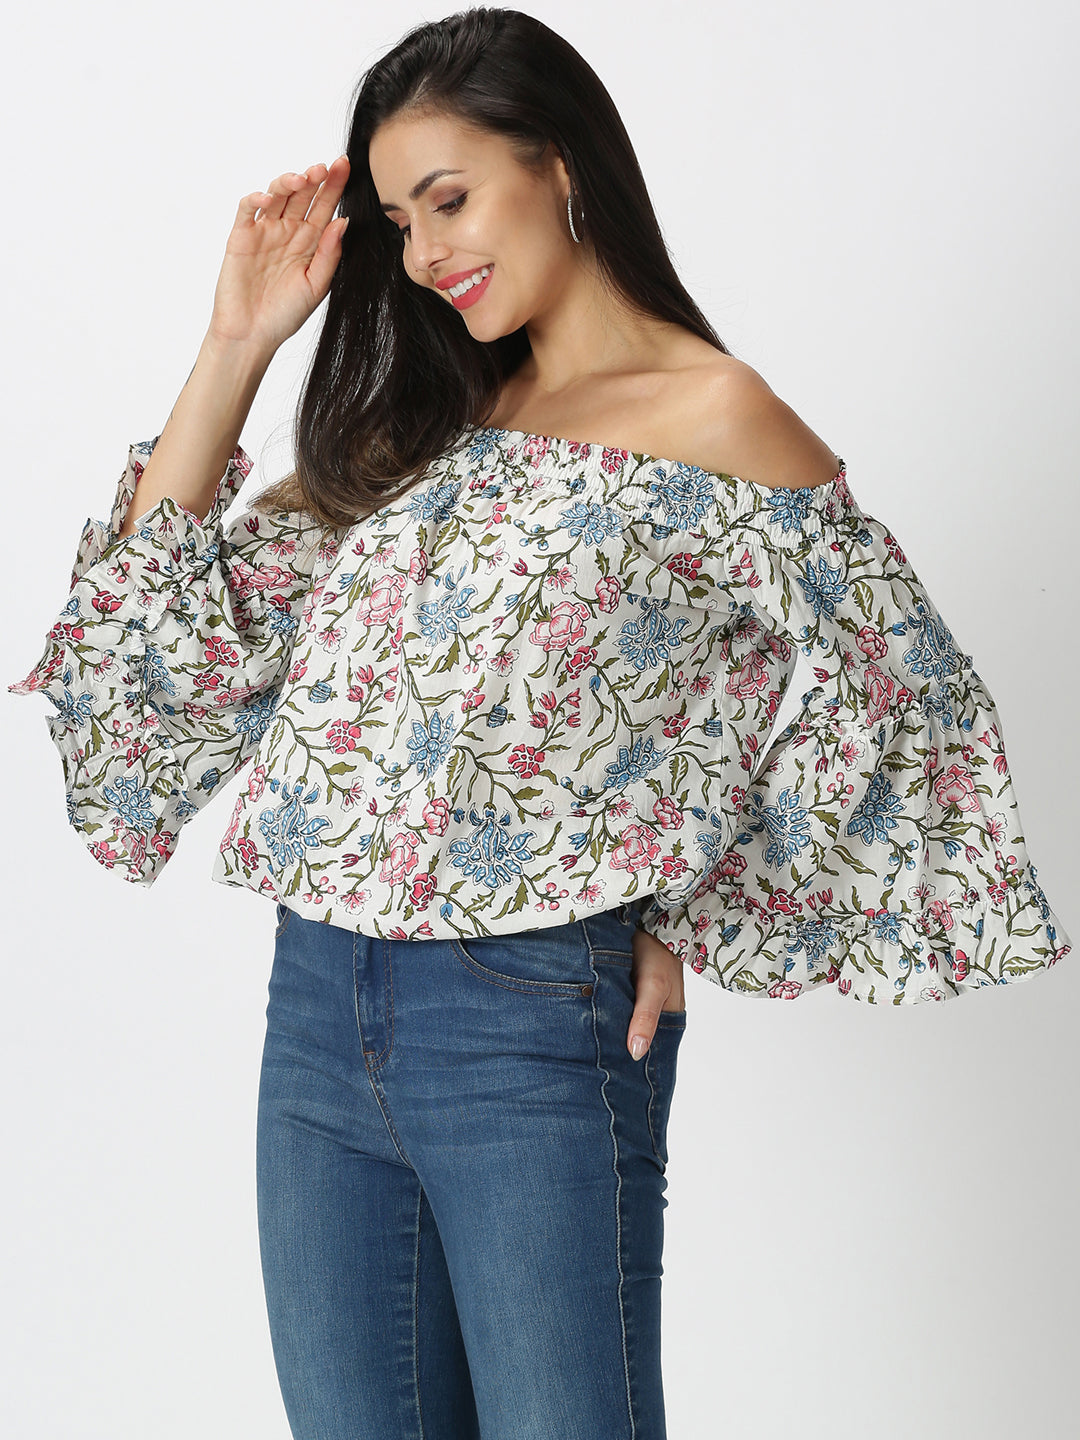 White Cotton Boho Printed Off Shoulder Top with Bell Sleeves